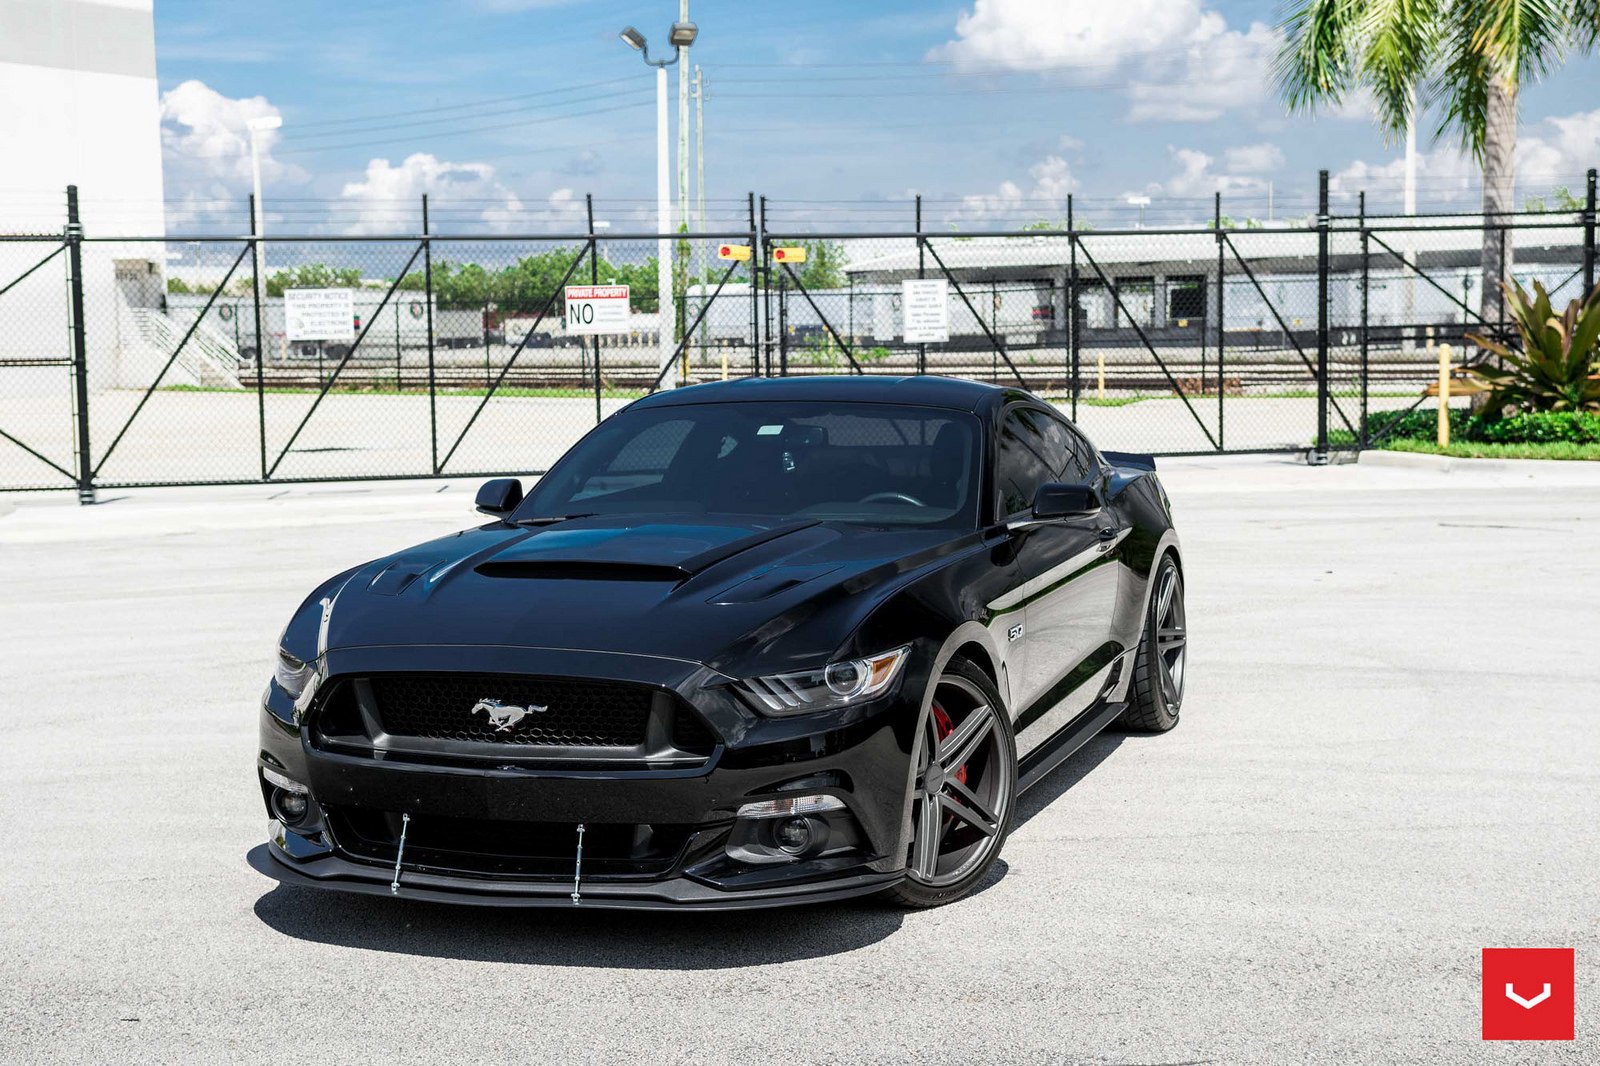 2015, Ford, Mustang, Coupe, Cars, Vossen, Wheels, Cars Wallpaper